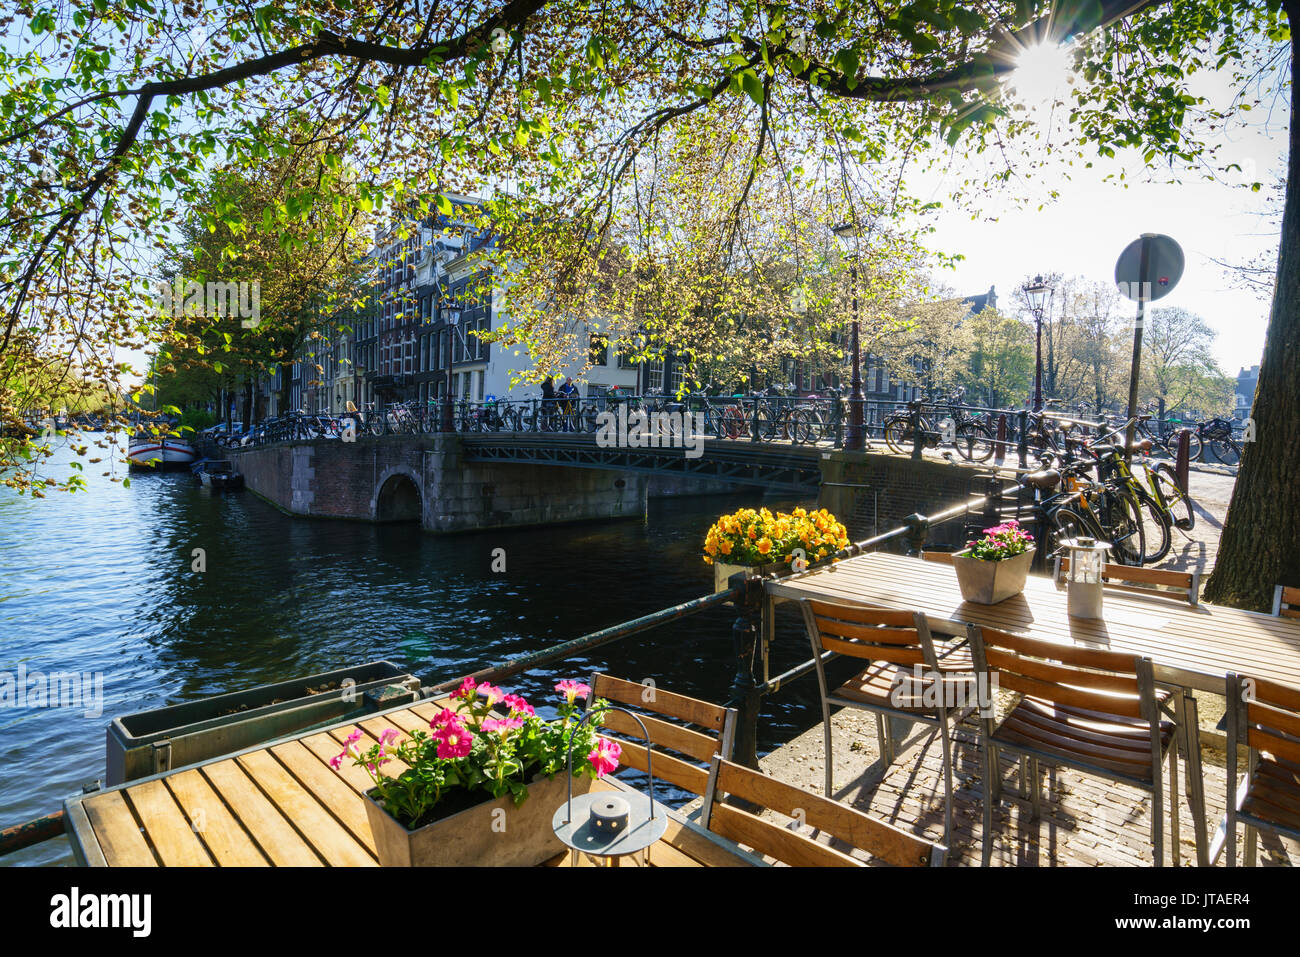 Canal Brouwersgracht, Amsterdam, Pays-Bas, Europe Banque D'Images